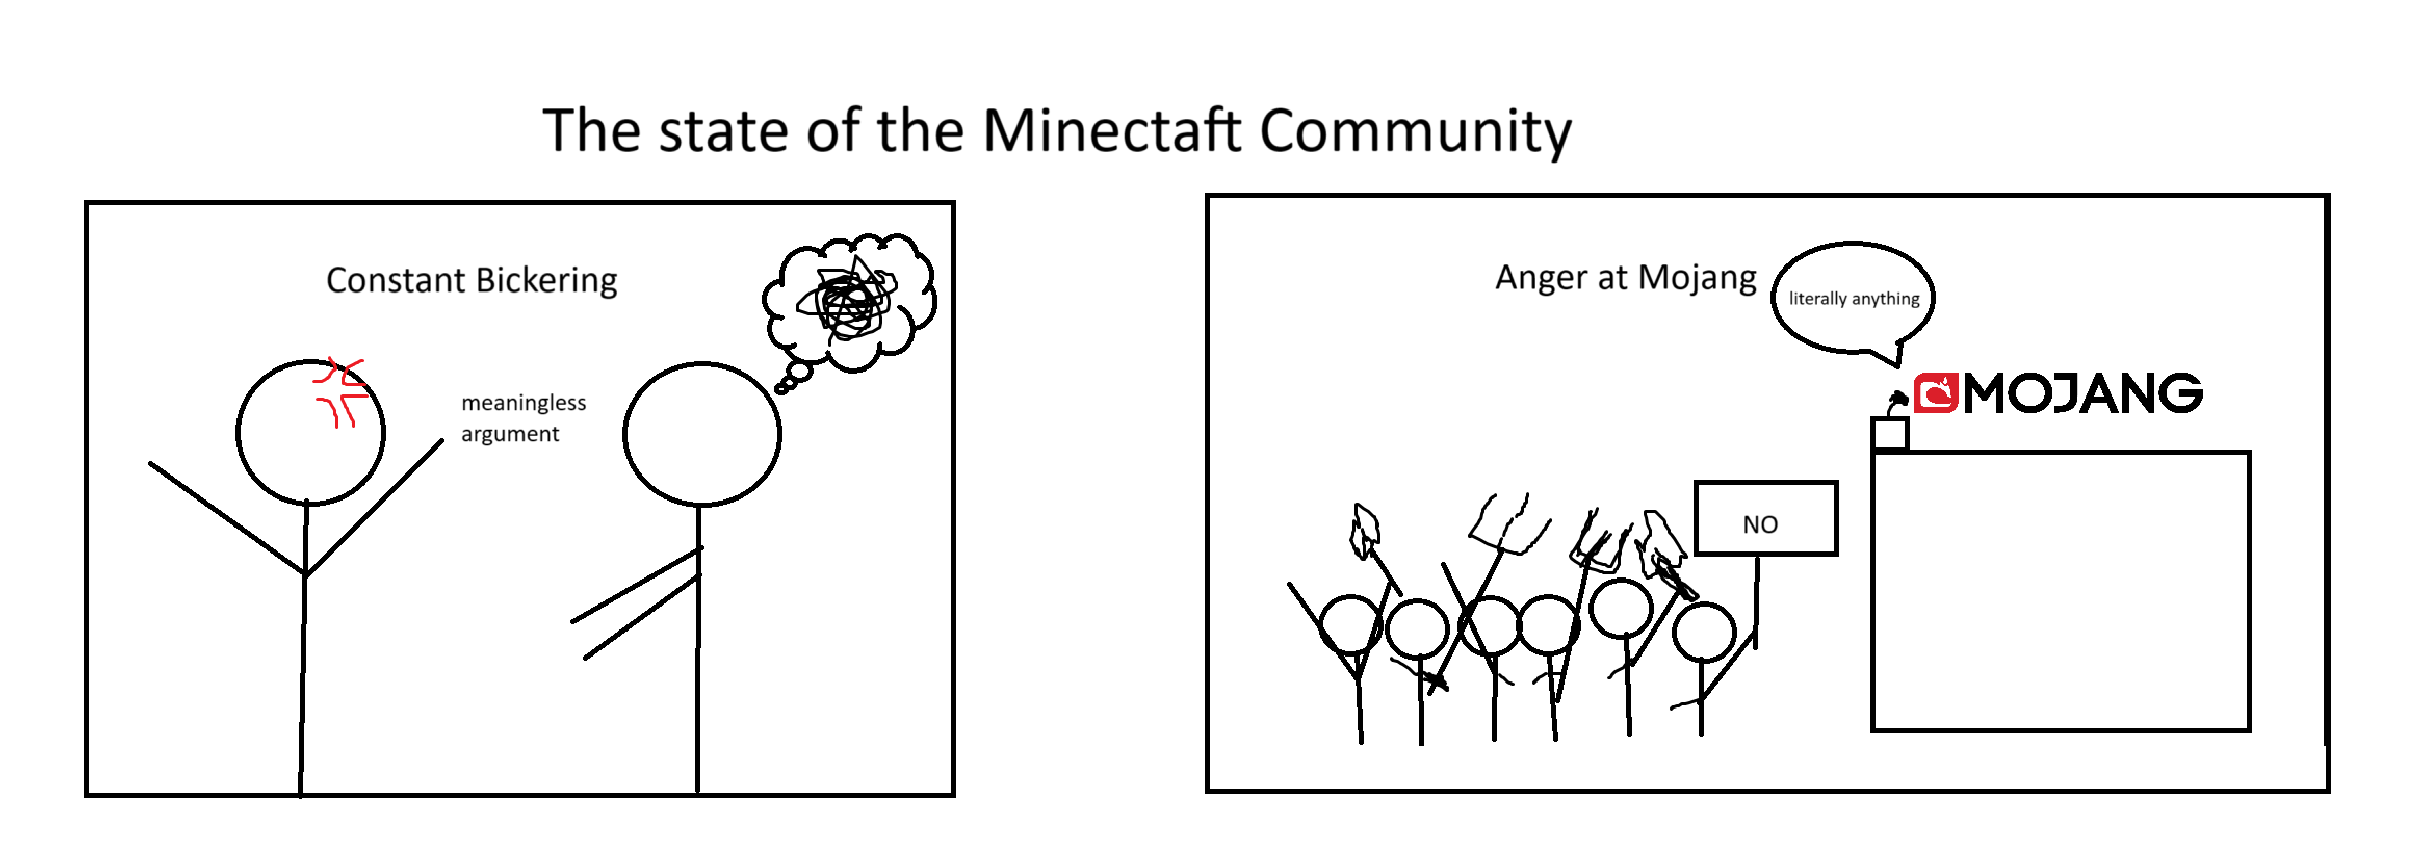 Minecraft Memes - Crafted in MS Paint - Spicy Meme